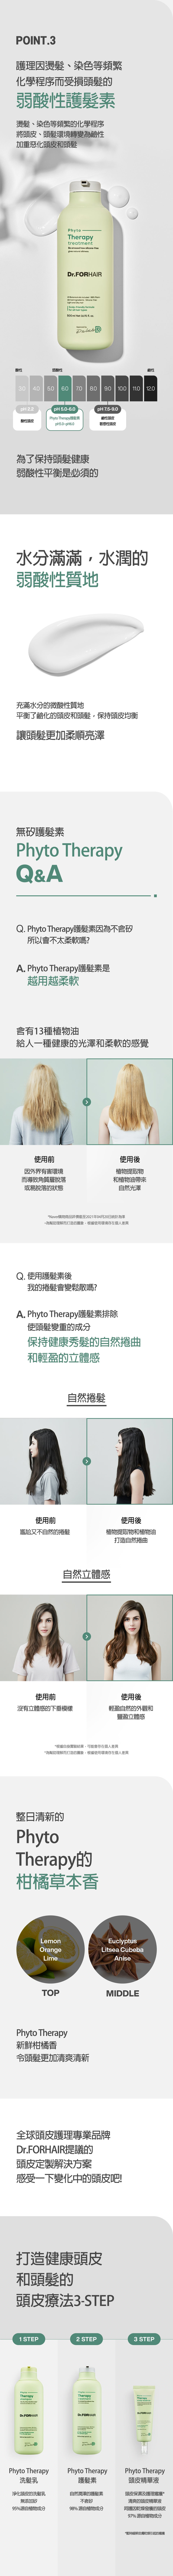 Dr.FORHAIR Phyto Therapy護髮素 | Chyaaa.com